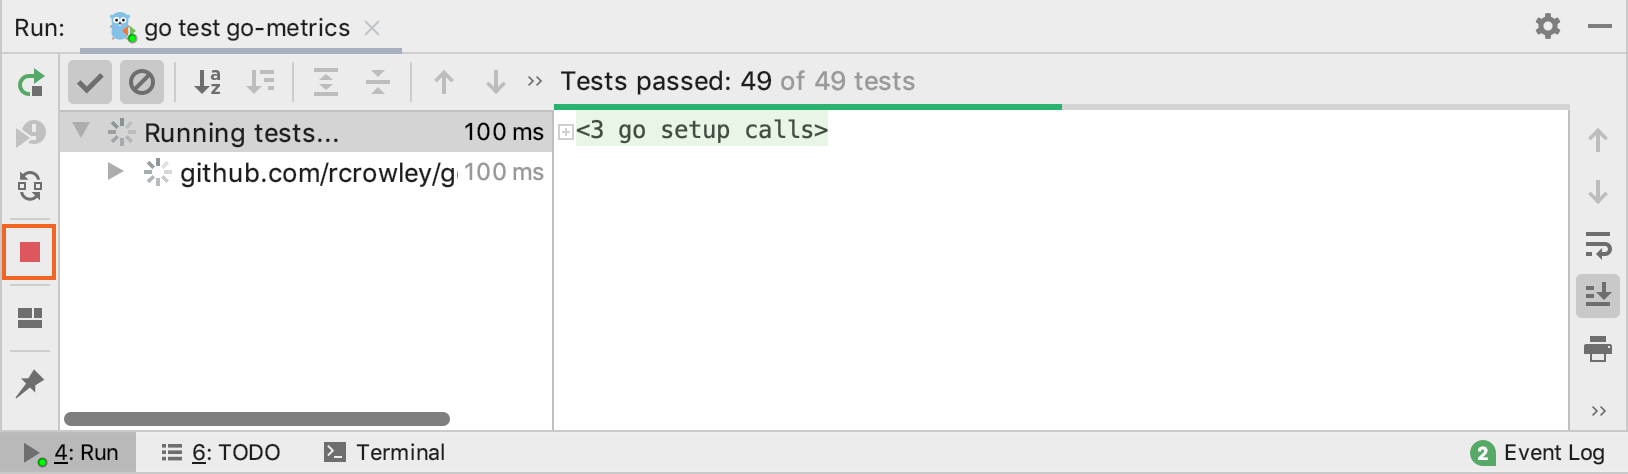 go stop running tests png